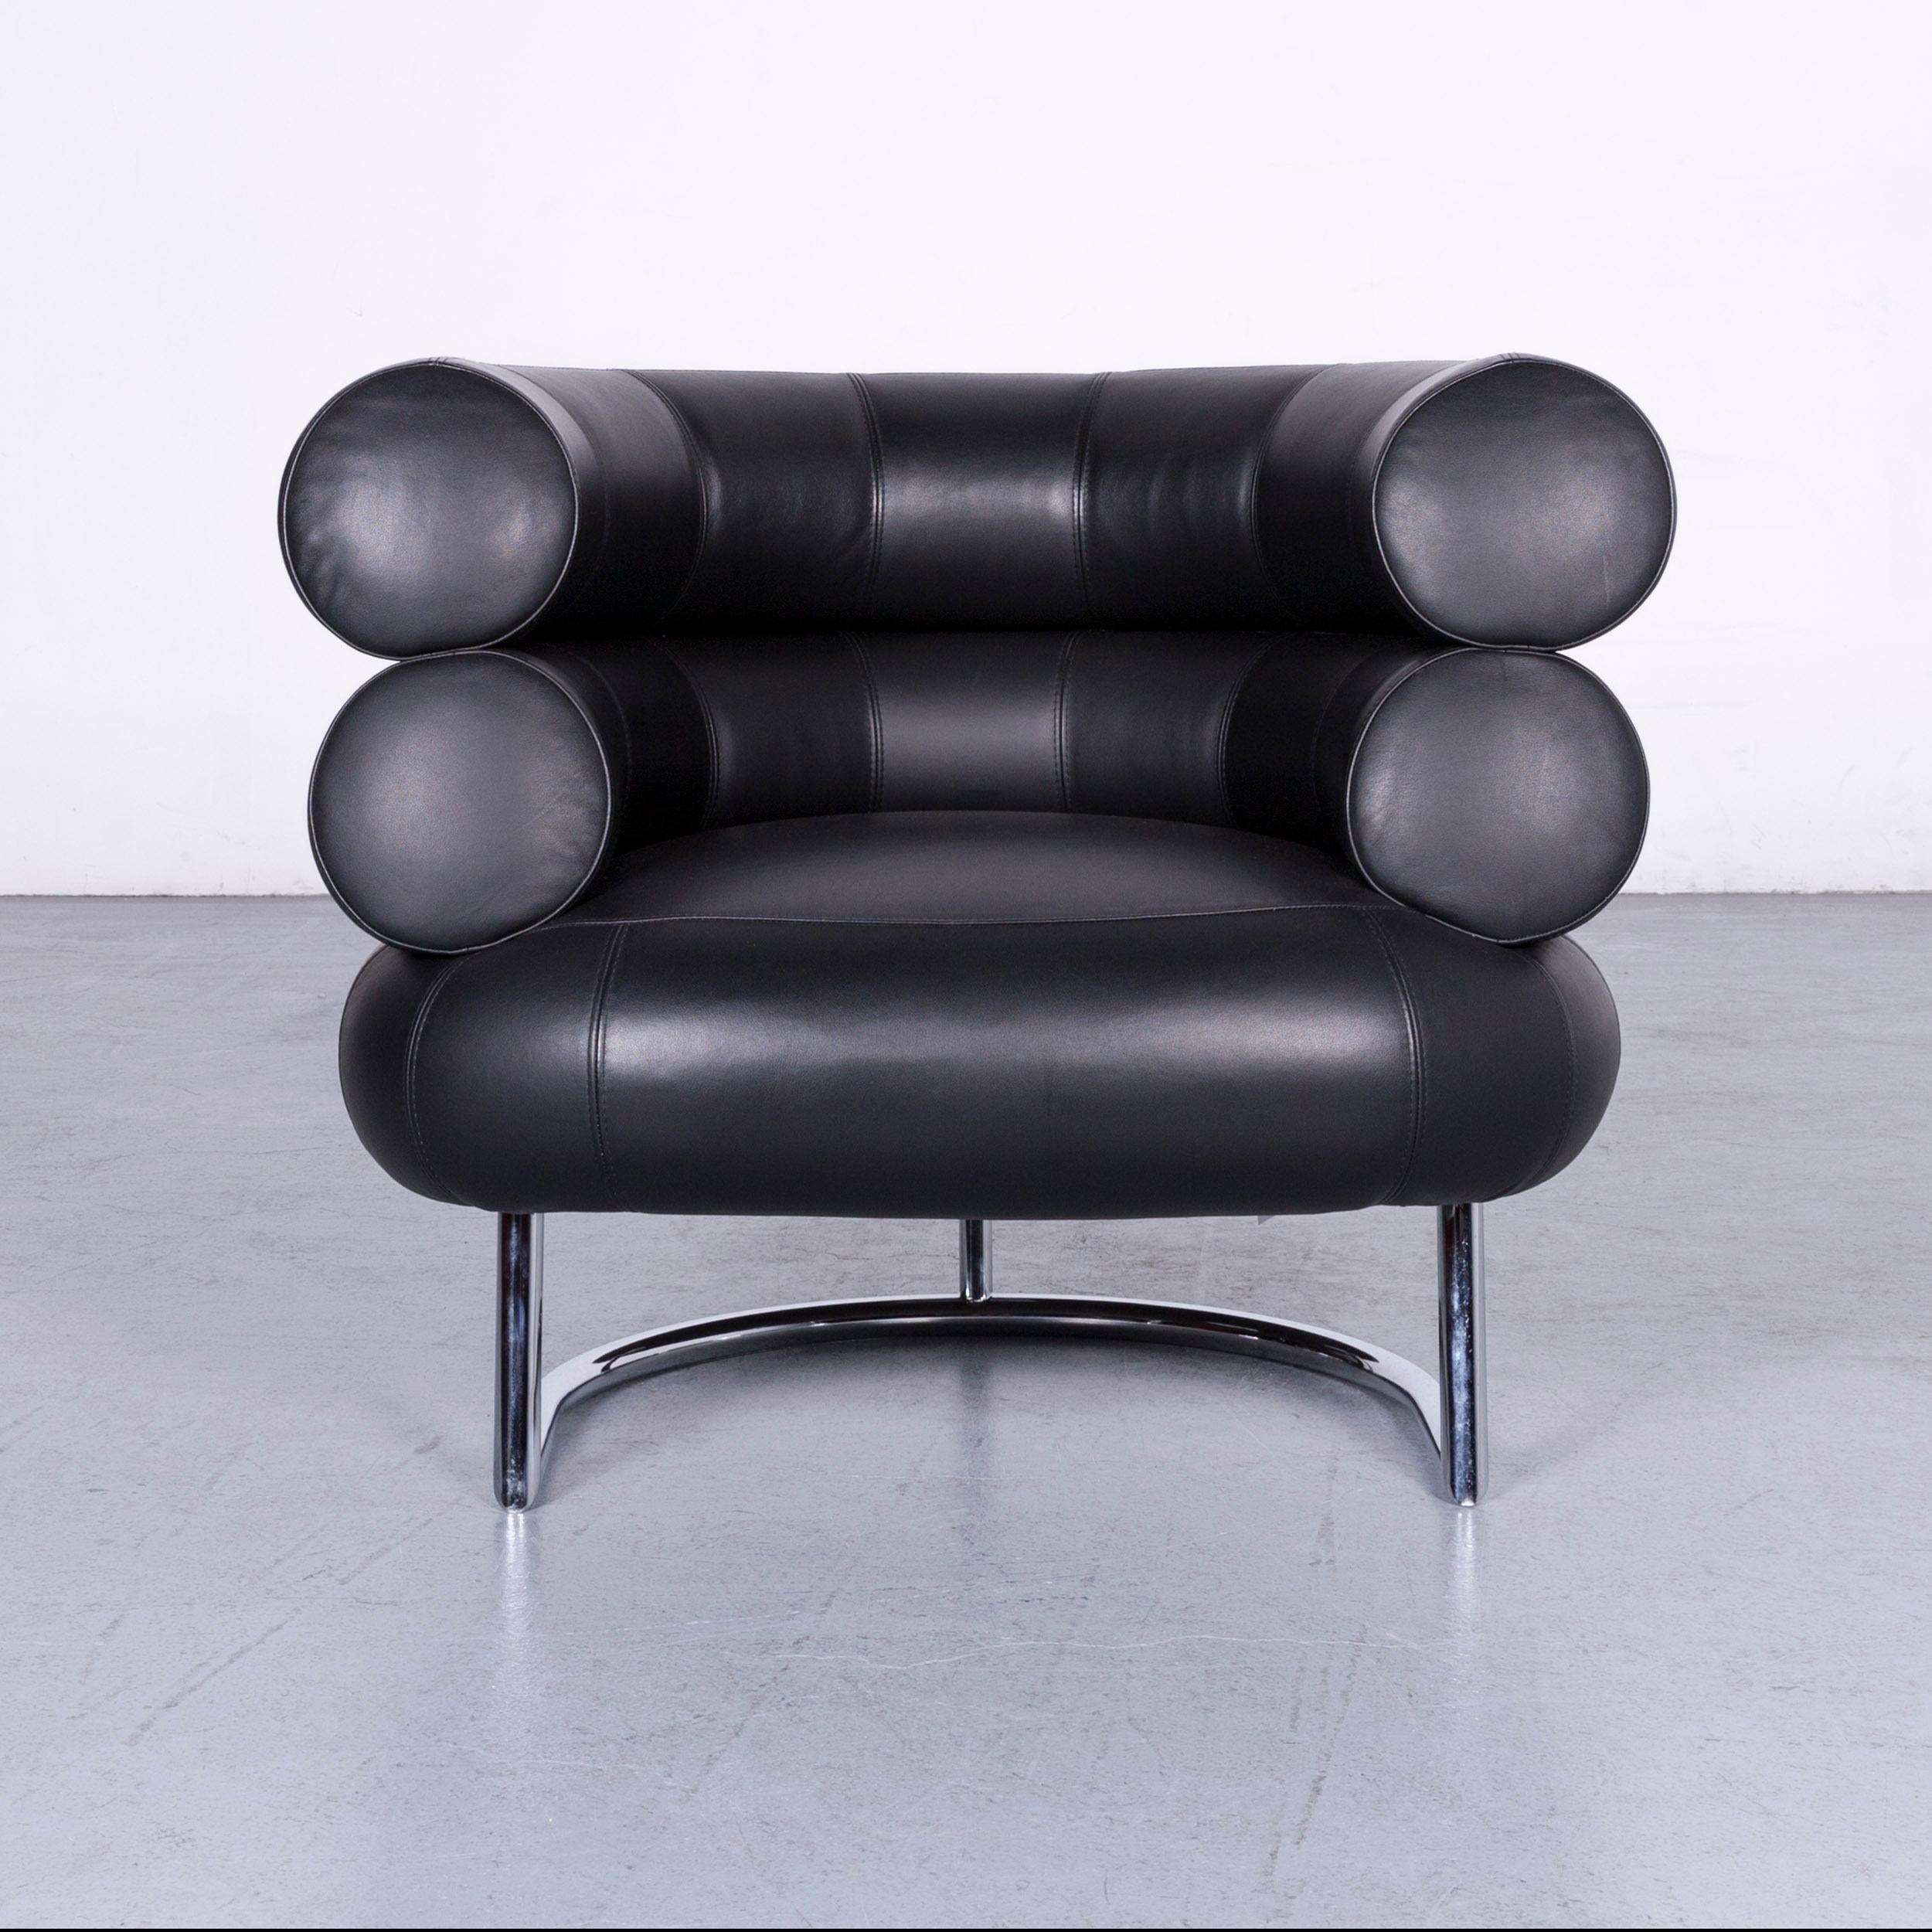 We bring to you a ClassiCon Bibendum chair designer leather armchair black.












 